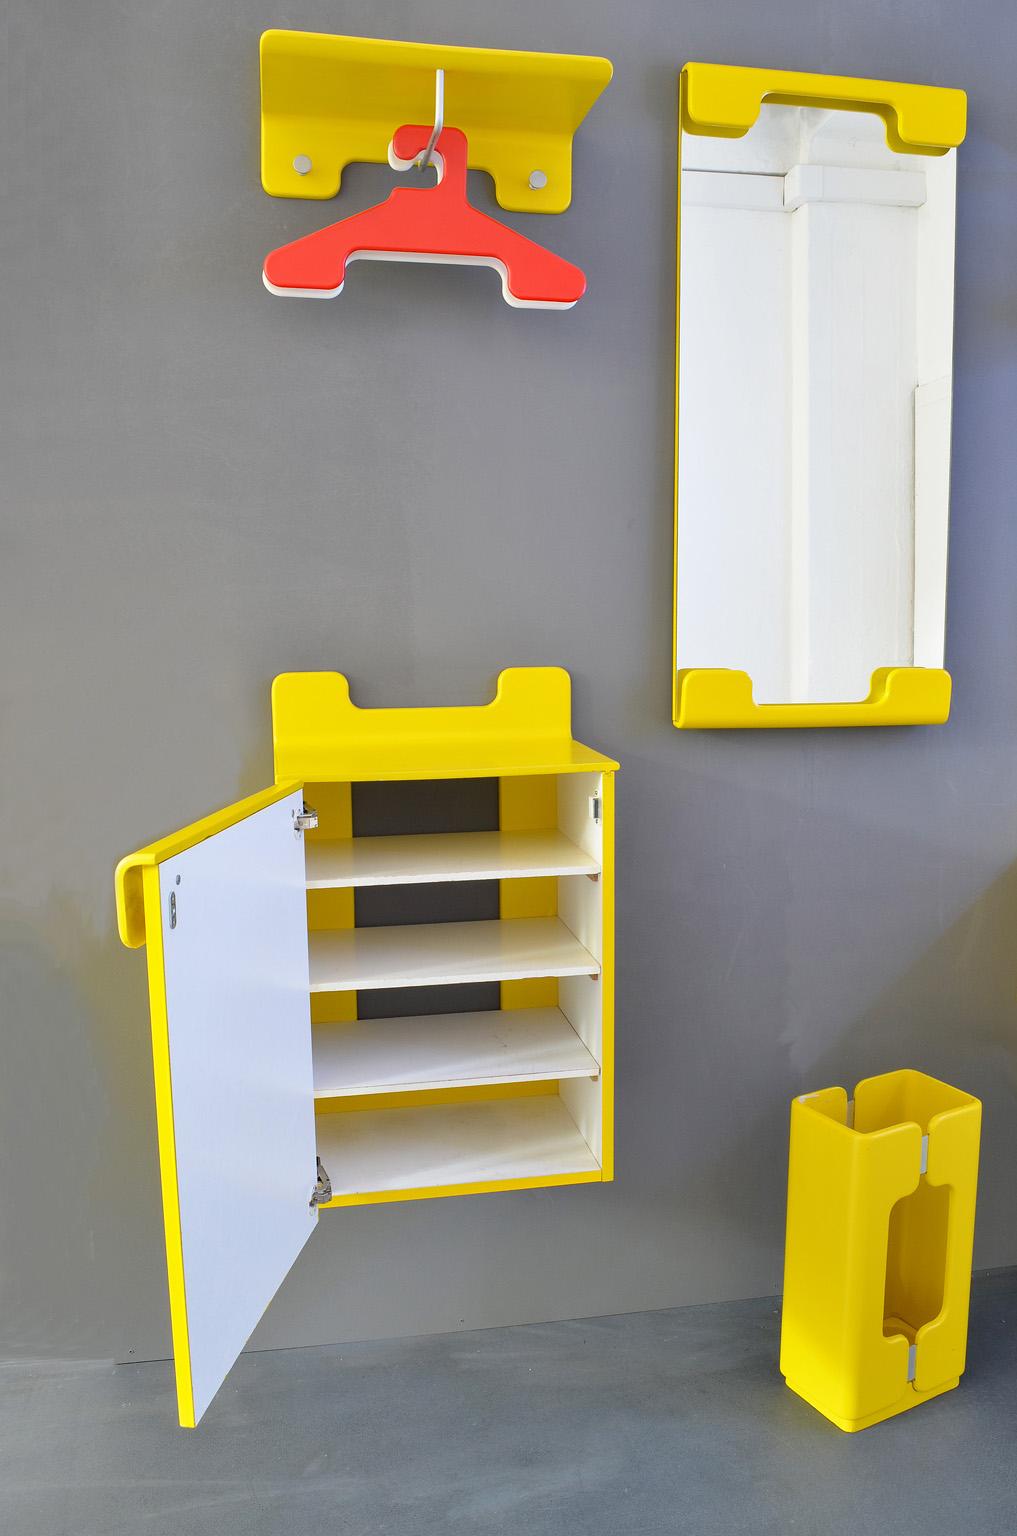 Mid-Century Modern Wall Unit Set or Wardrobe Set from Schönbuch 1970s, Yellow lacquered Wood